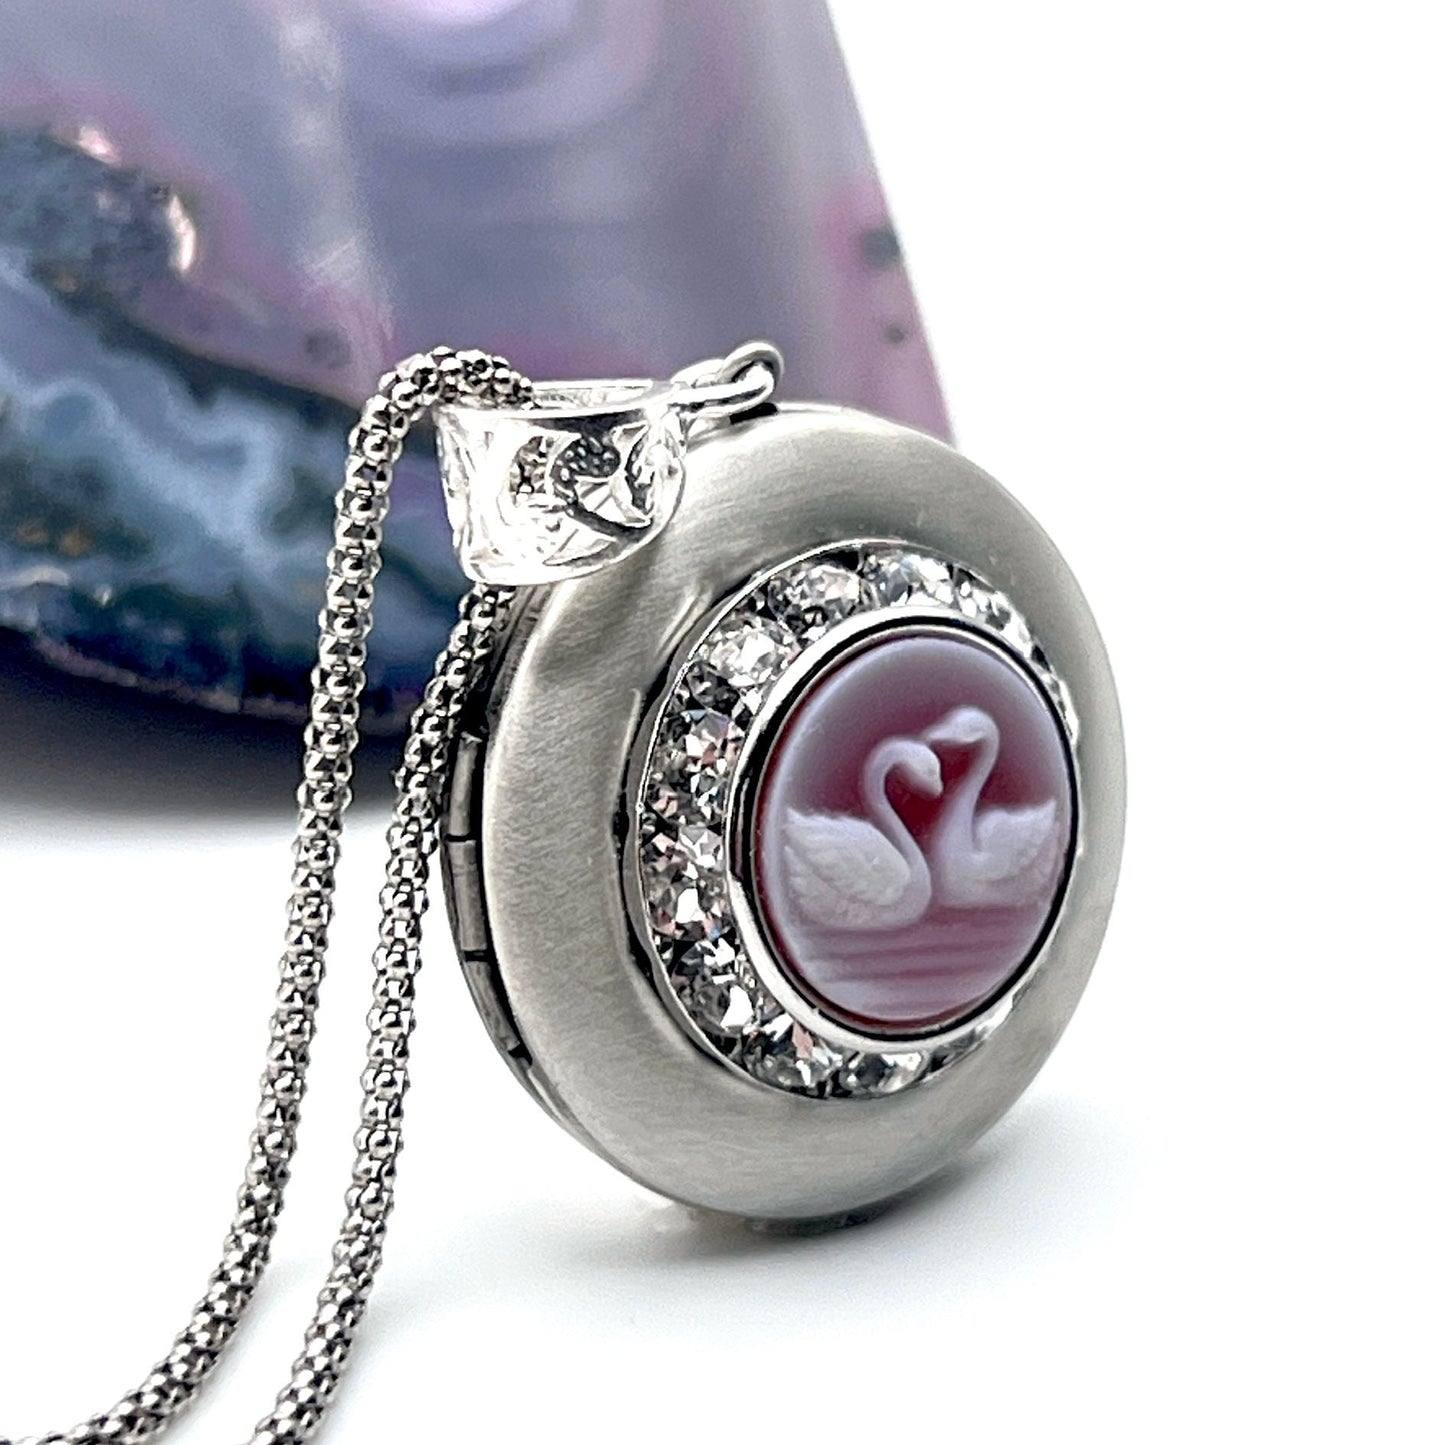 Romantic Cameo Locket, Victorian Photo Locket Necklace, Love Bird Anniversary Gifts, Valentines Day Gift for Wife